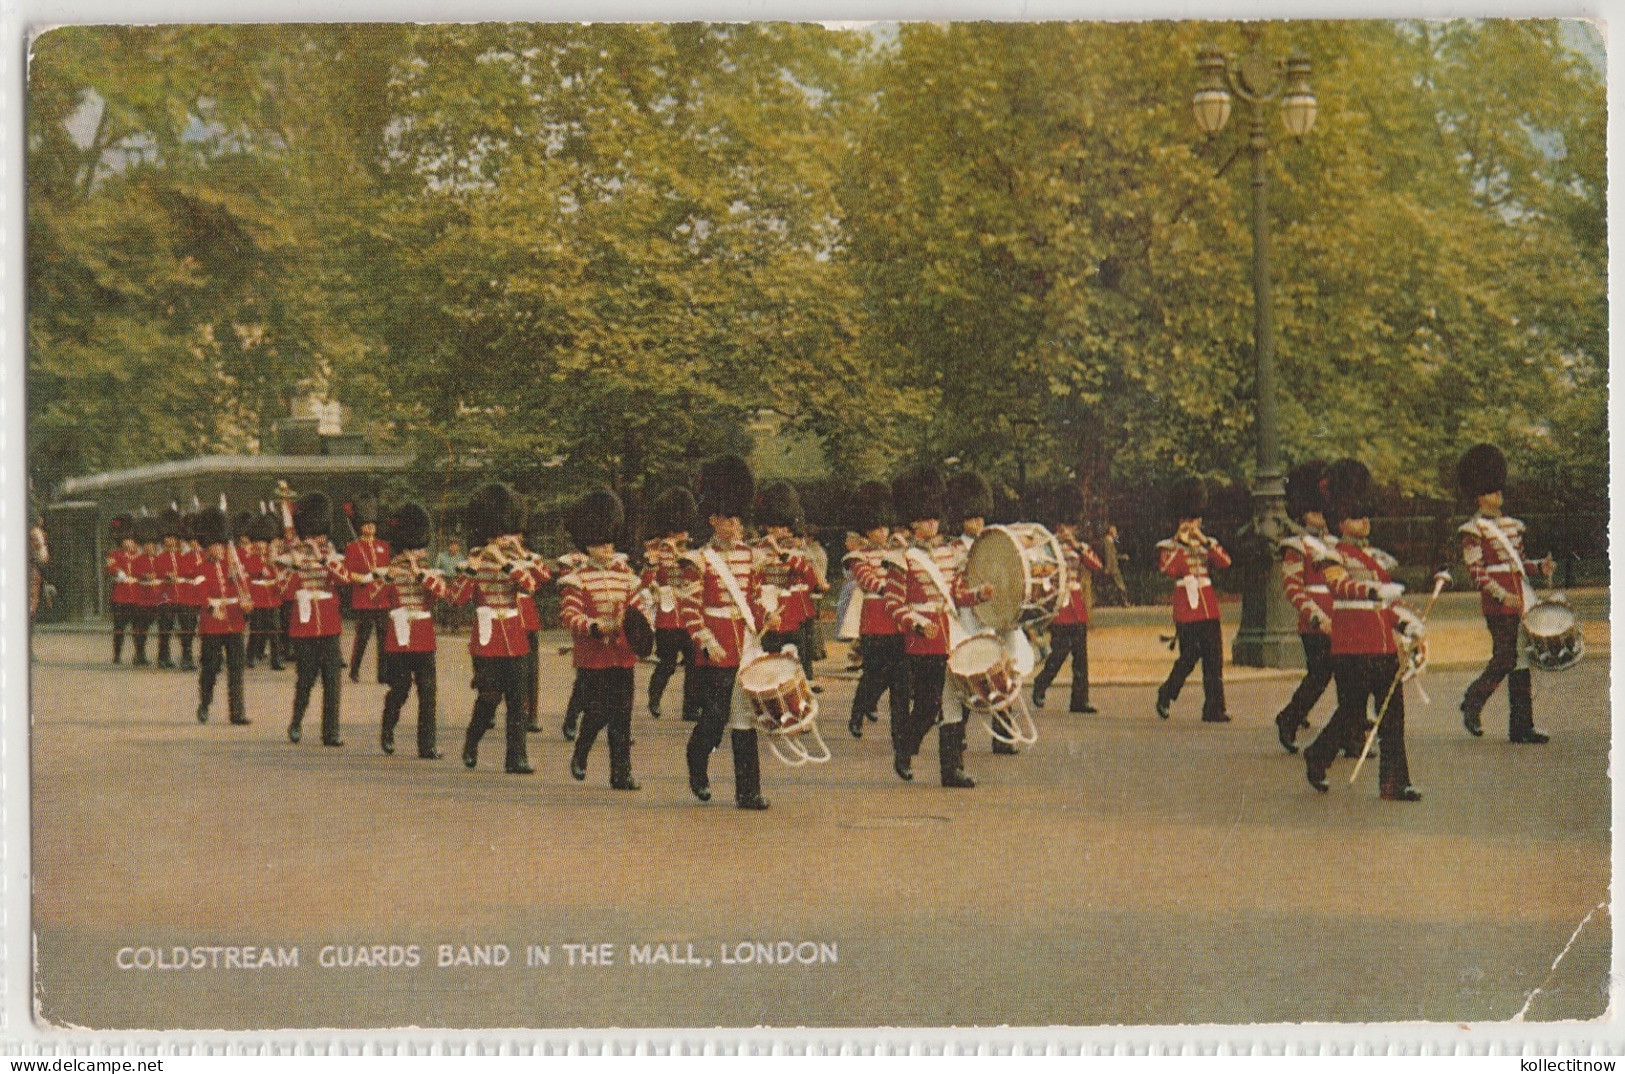 COLDSTREAM GUARDS BAND IN THE MALL - LONDON - Whitehall